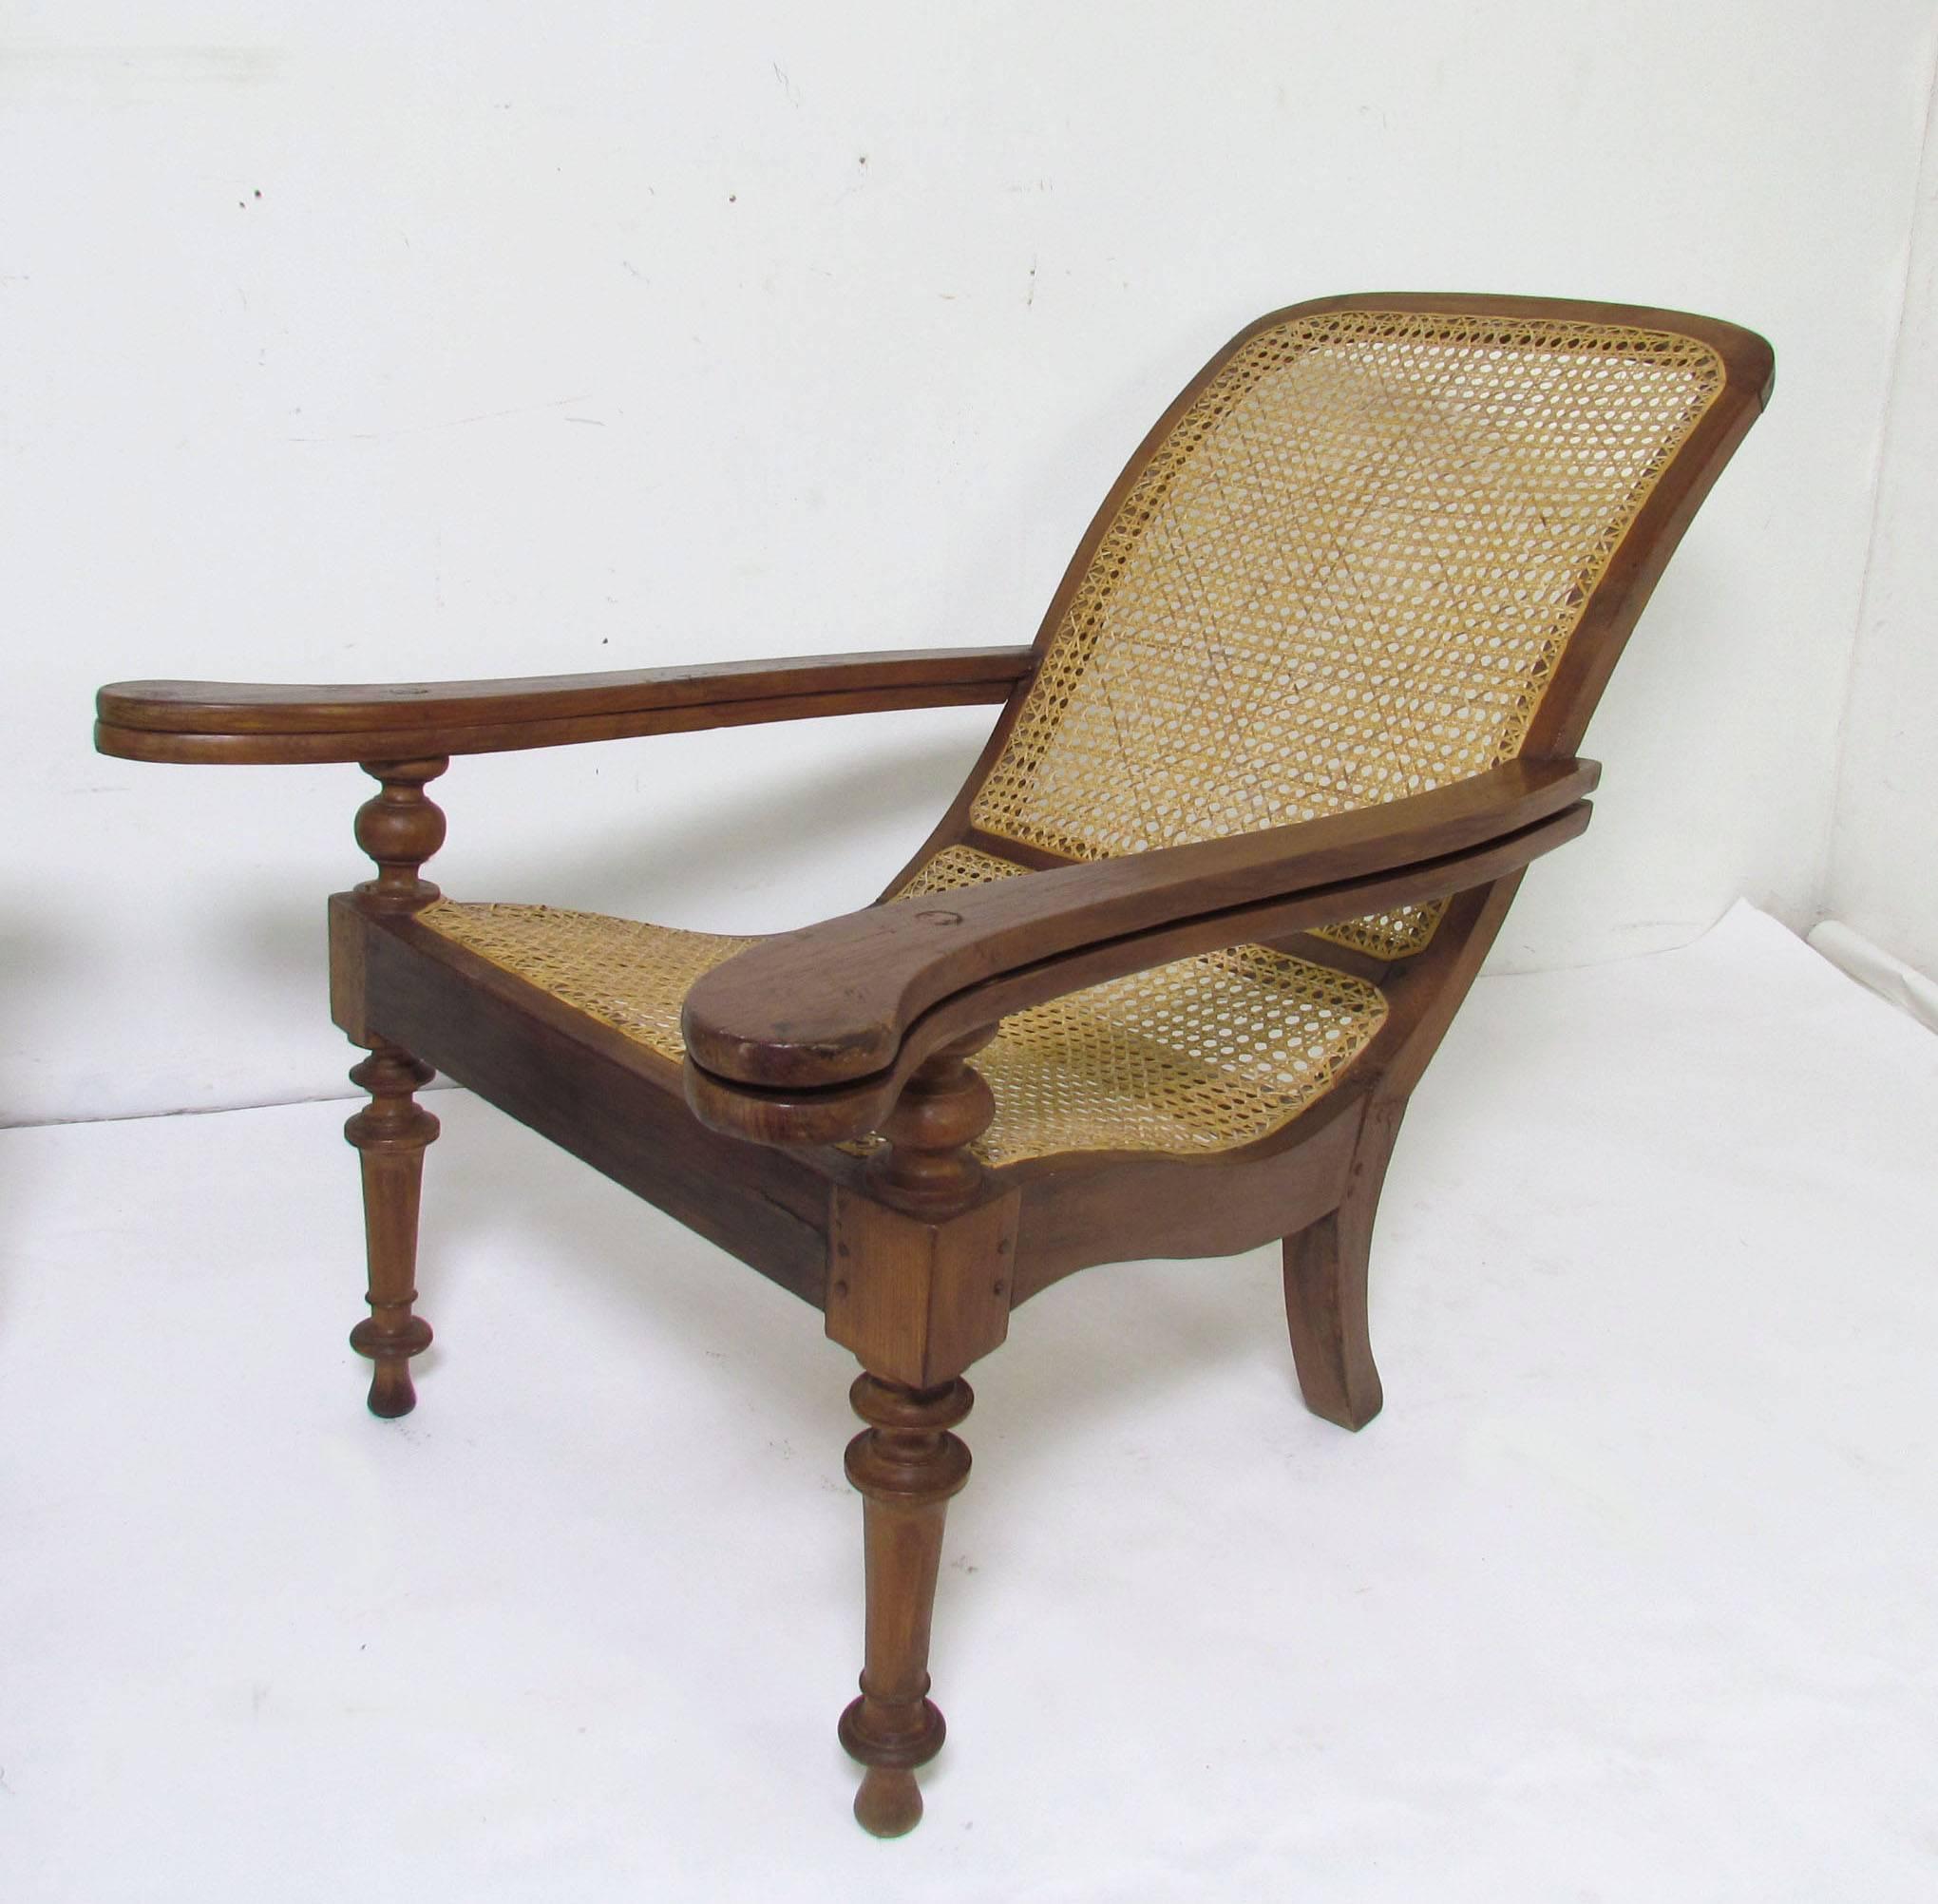 Antique Anglo-Indian long paddle arm plantation lounge chair, circa late 19th century. Retains its 